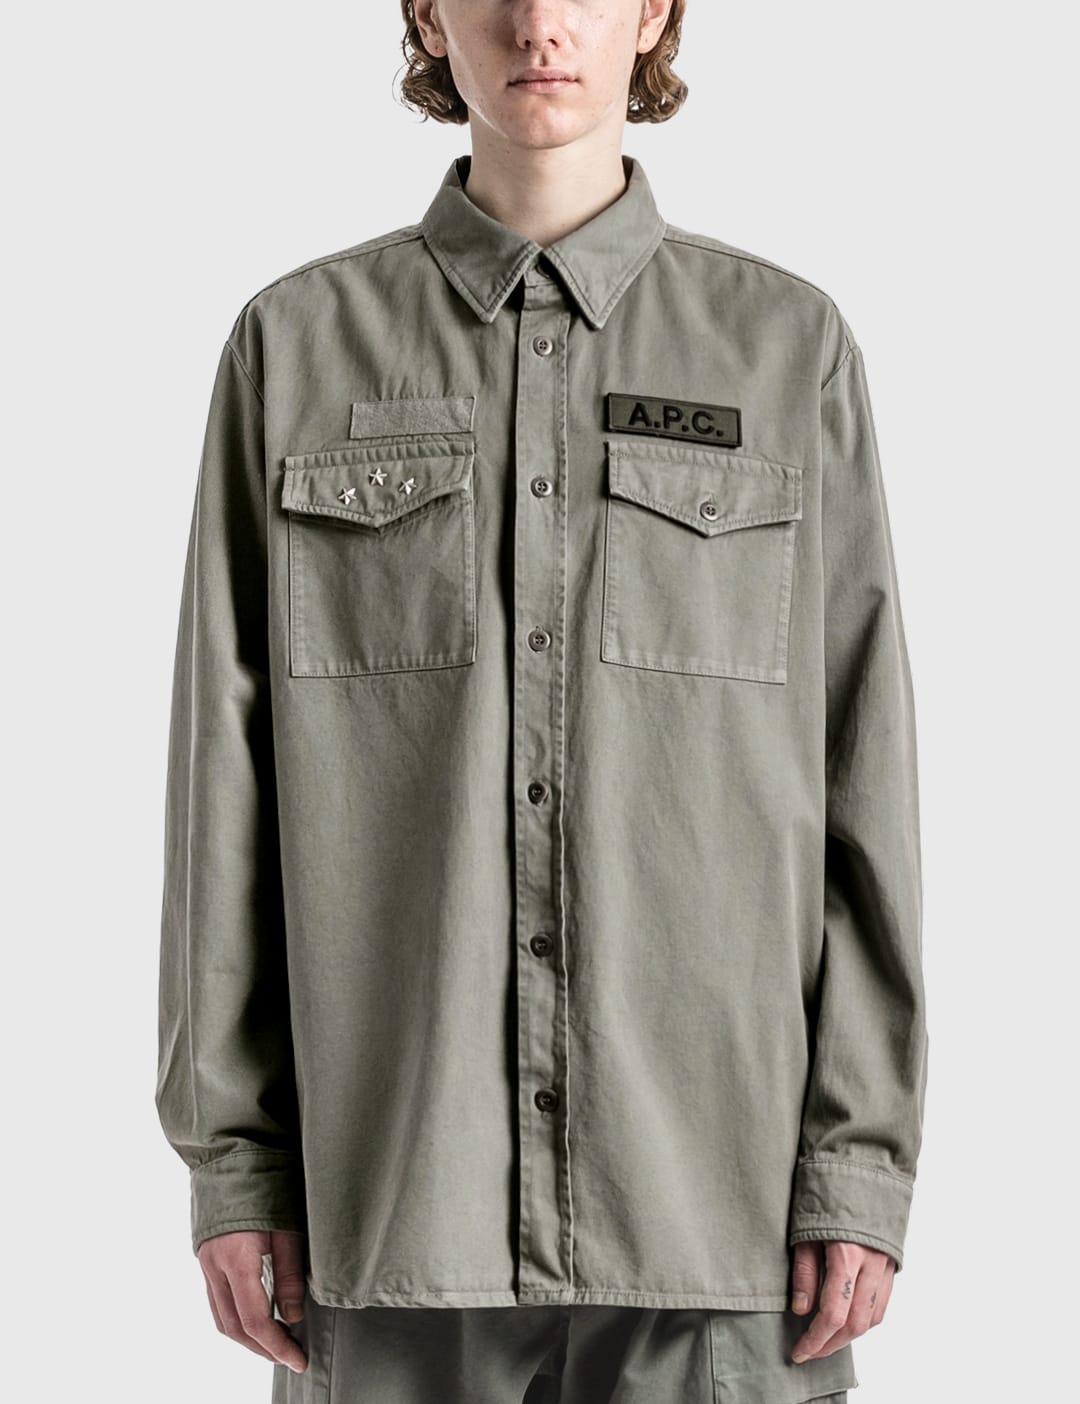 A.P.C. - Mainline Overshirt | HBX - Globally Curated Fashion and